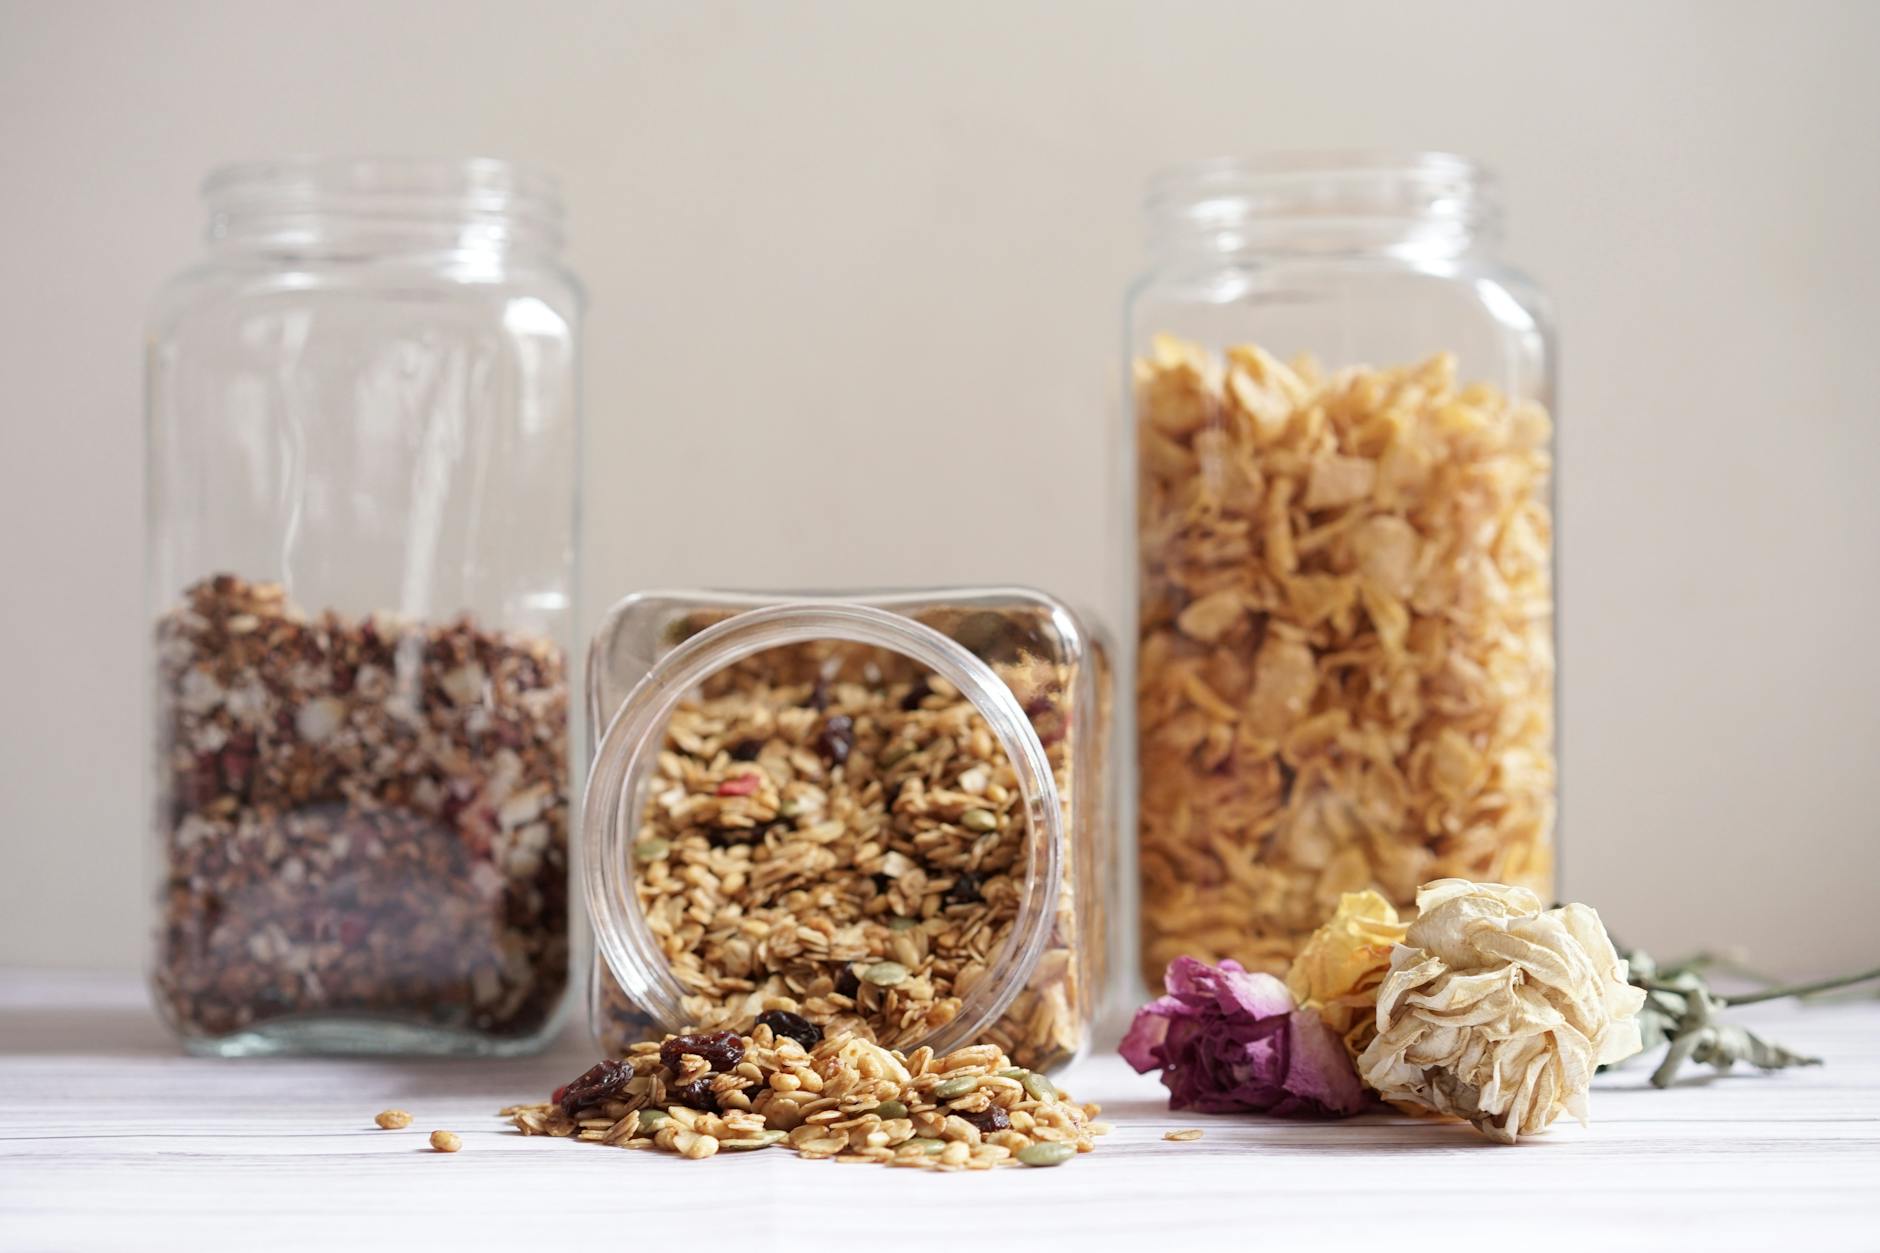 jars with pasta and oats